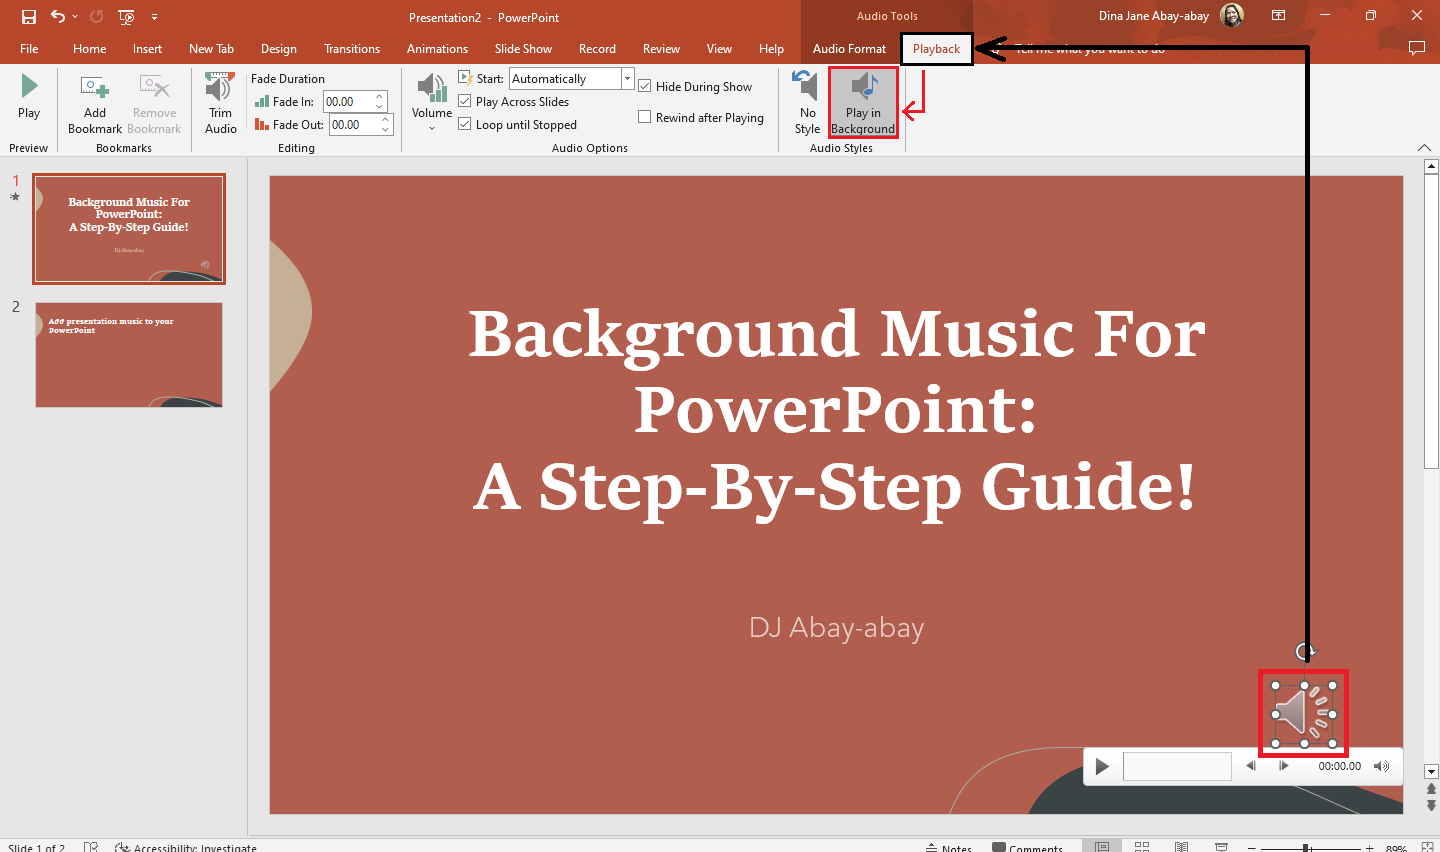 After you audio file appear on your presentation slide, go to "Playback" tab and click "Play in Background."